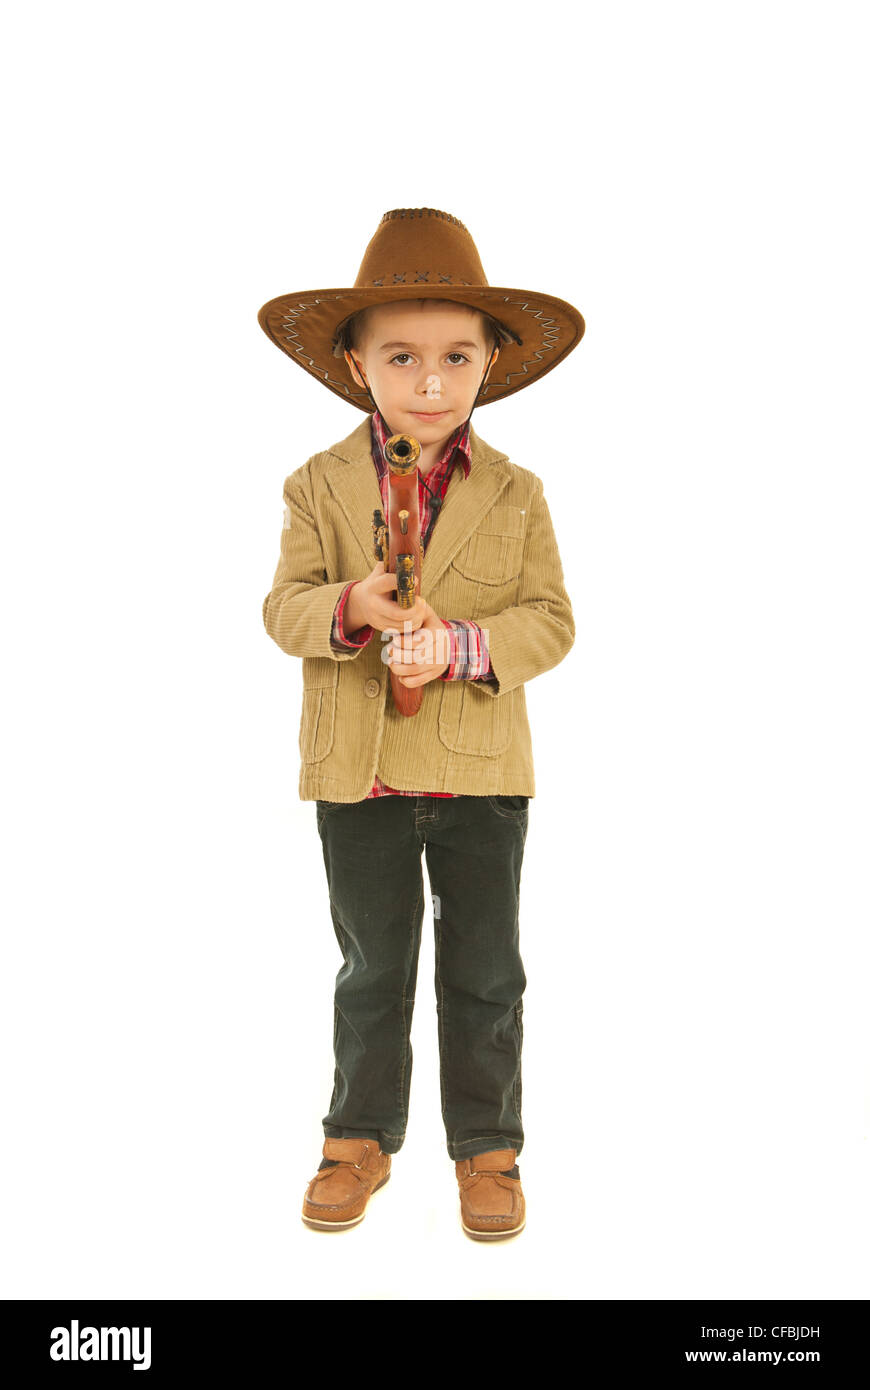 Full length of little cowboy holding weapon toy isolated on white background Stock Photo